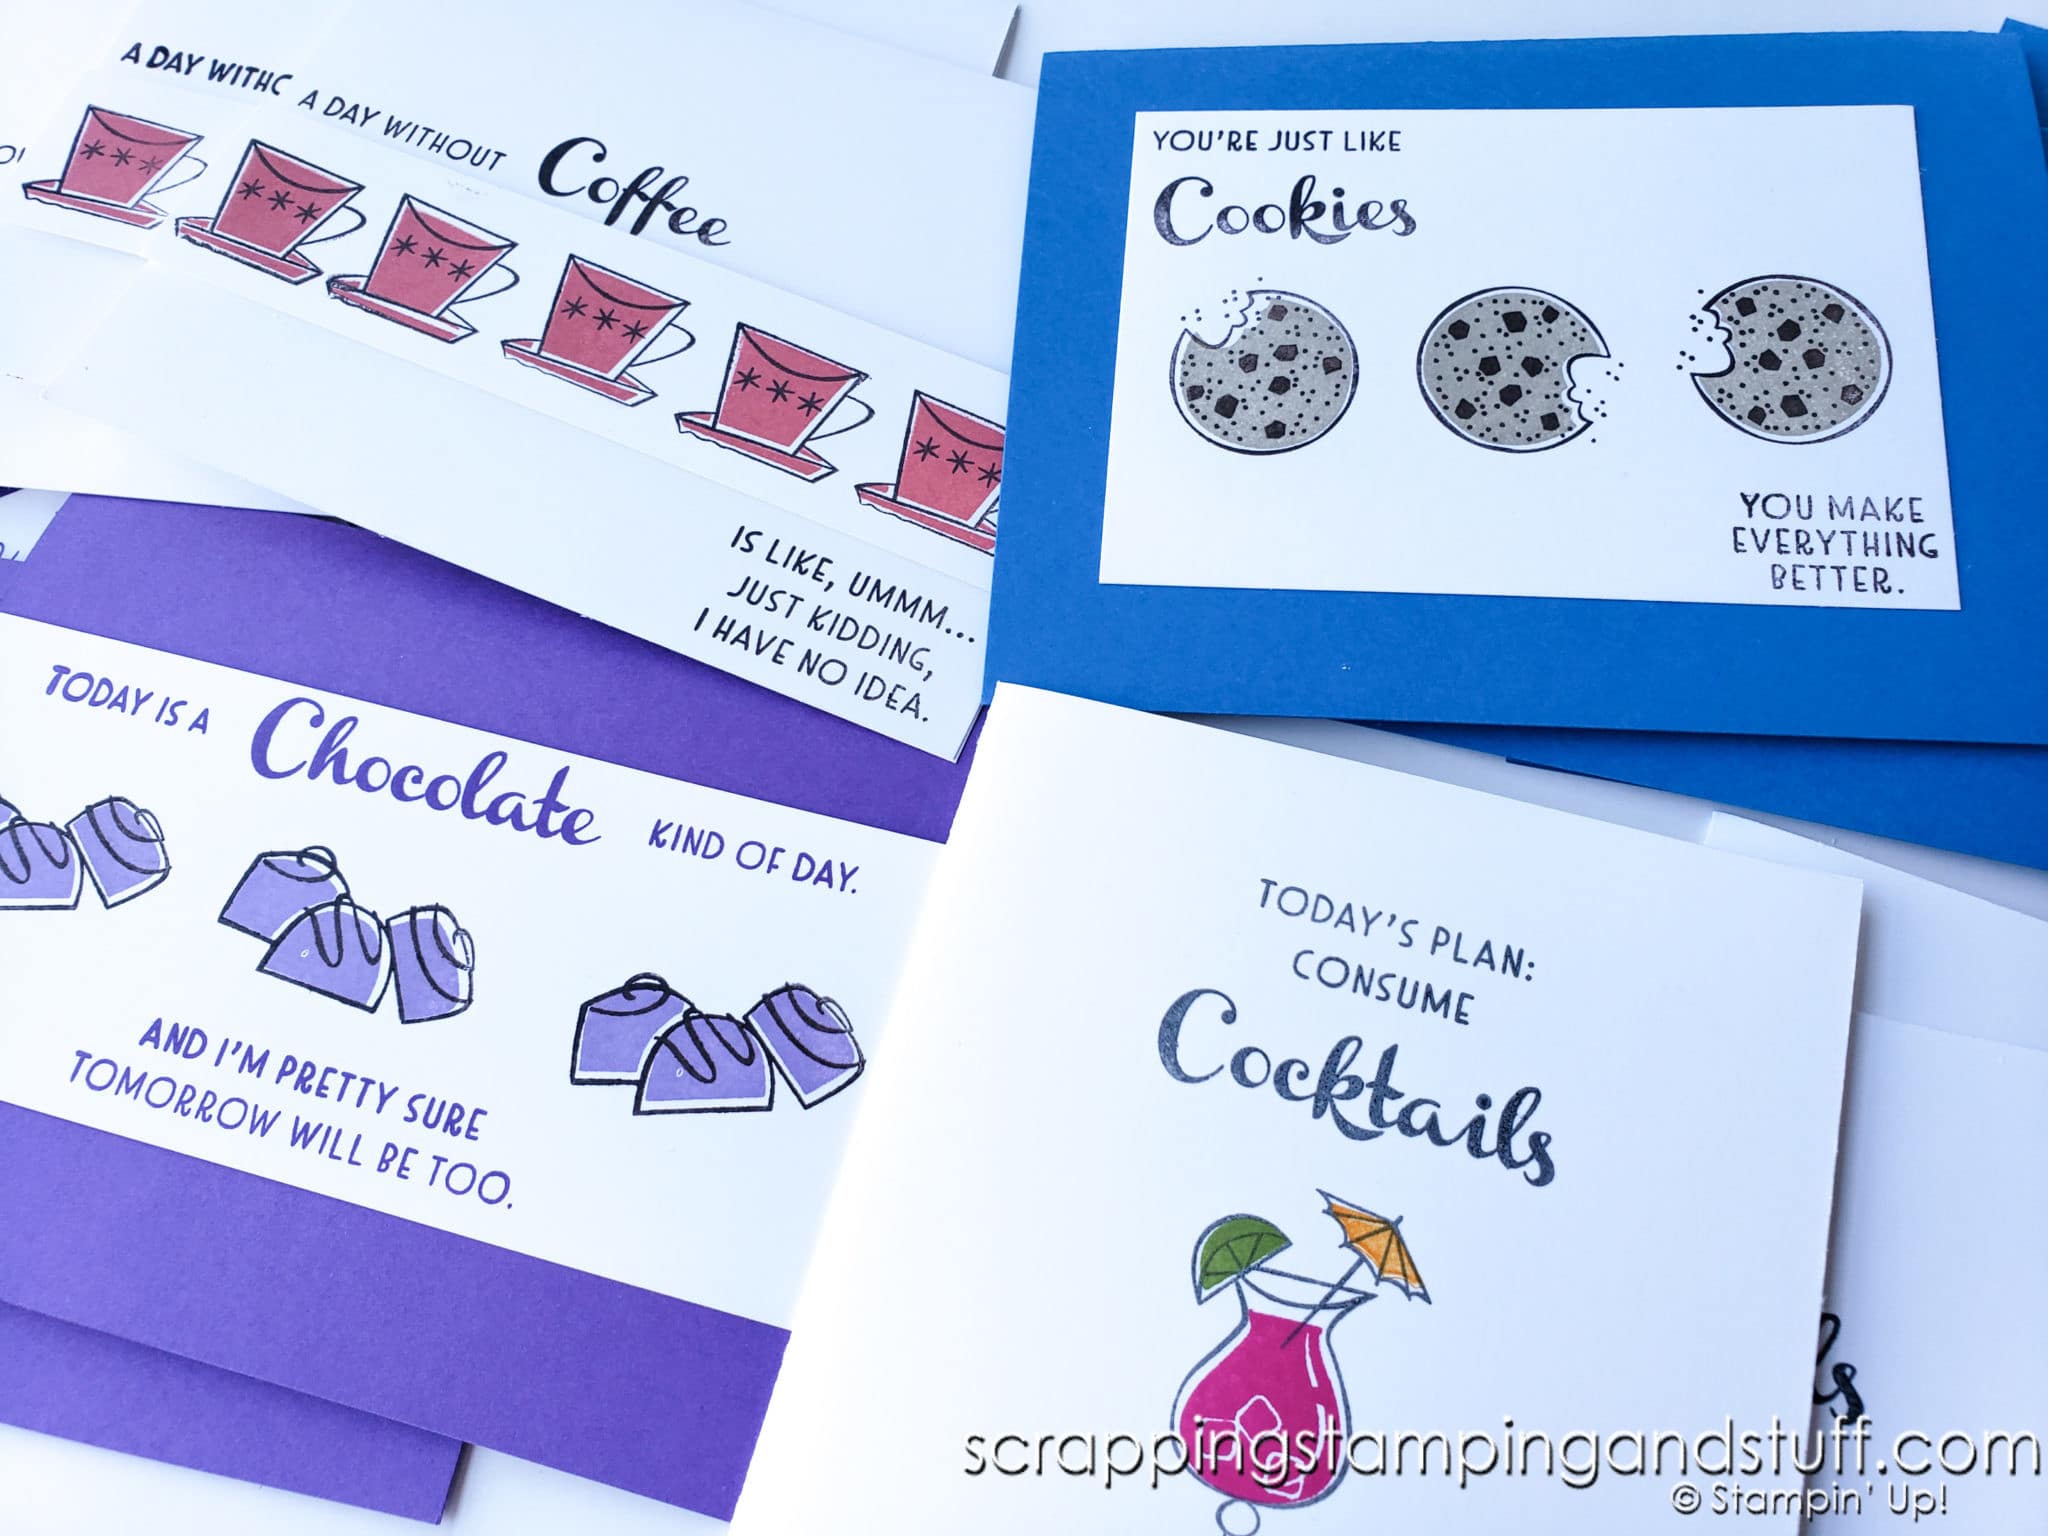 Coffee, Cookies, Cocktails and Chocolate Cards – YUM!